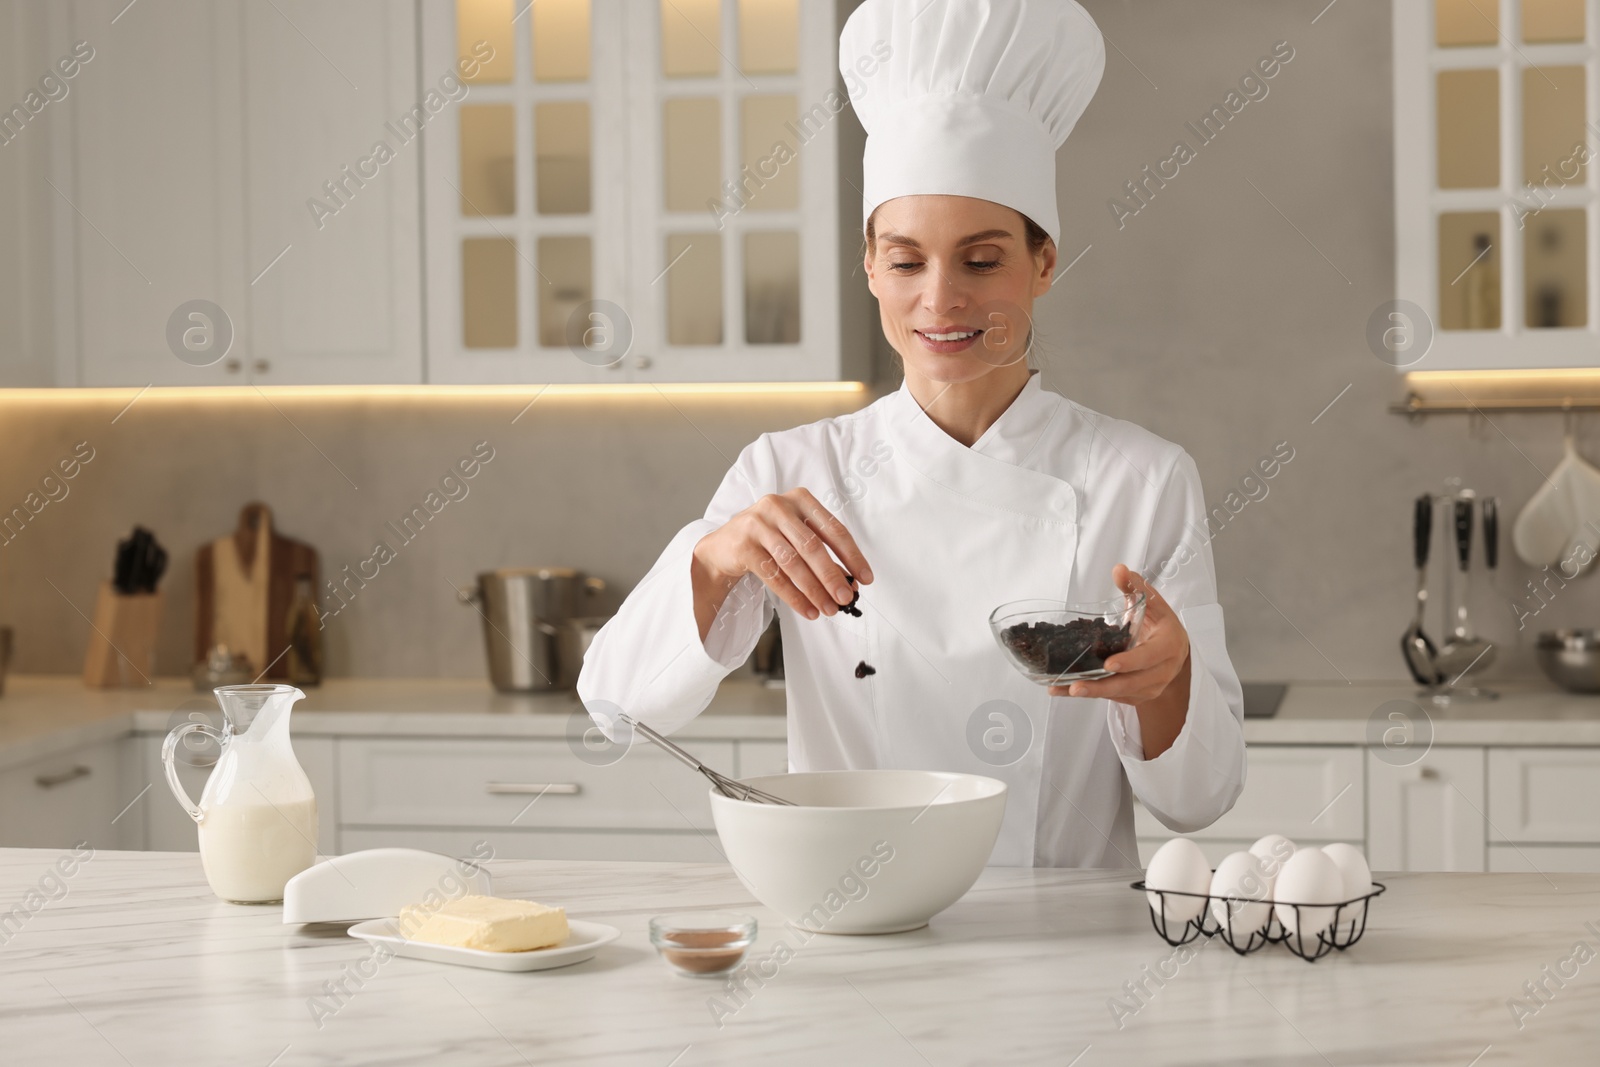 Photo of Professional chef adding raisins into dough at white marble table in kitchen